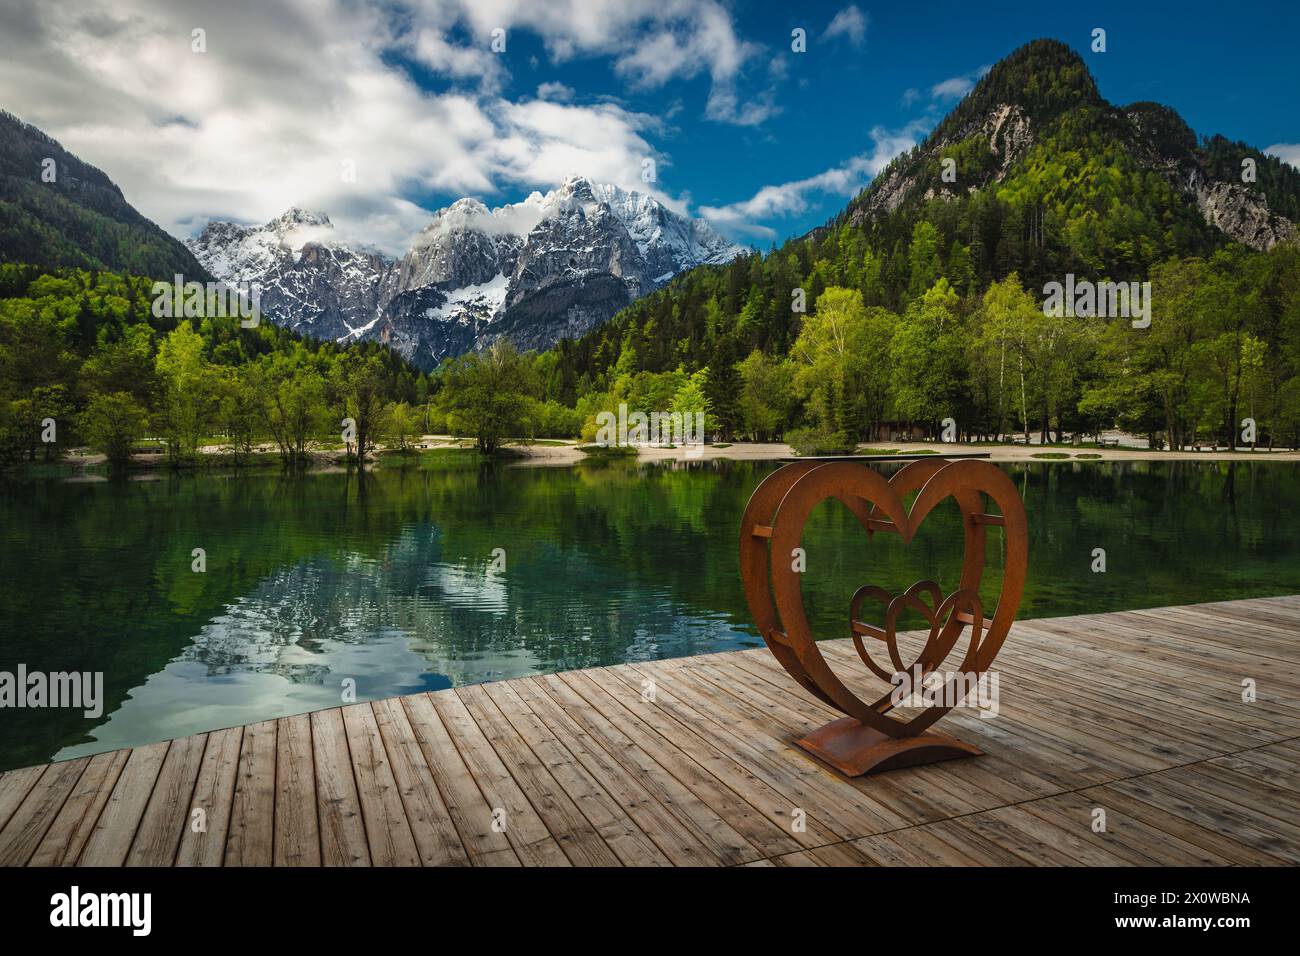 Picturesque scenery with snowy mountains, green forest and clean lake. Wooden pier on the Lake Jasna, Kranjska Gora, Slovenia, Europe Stock Photo